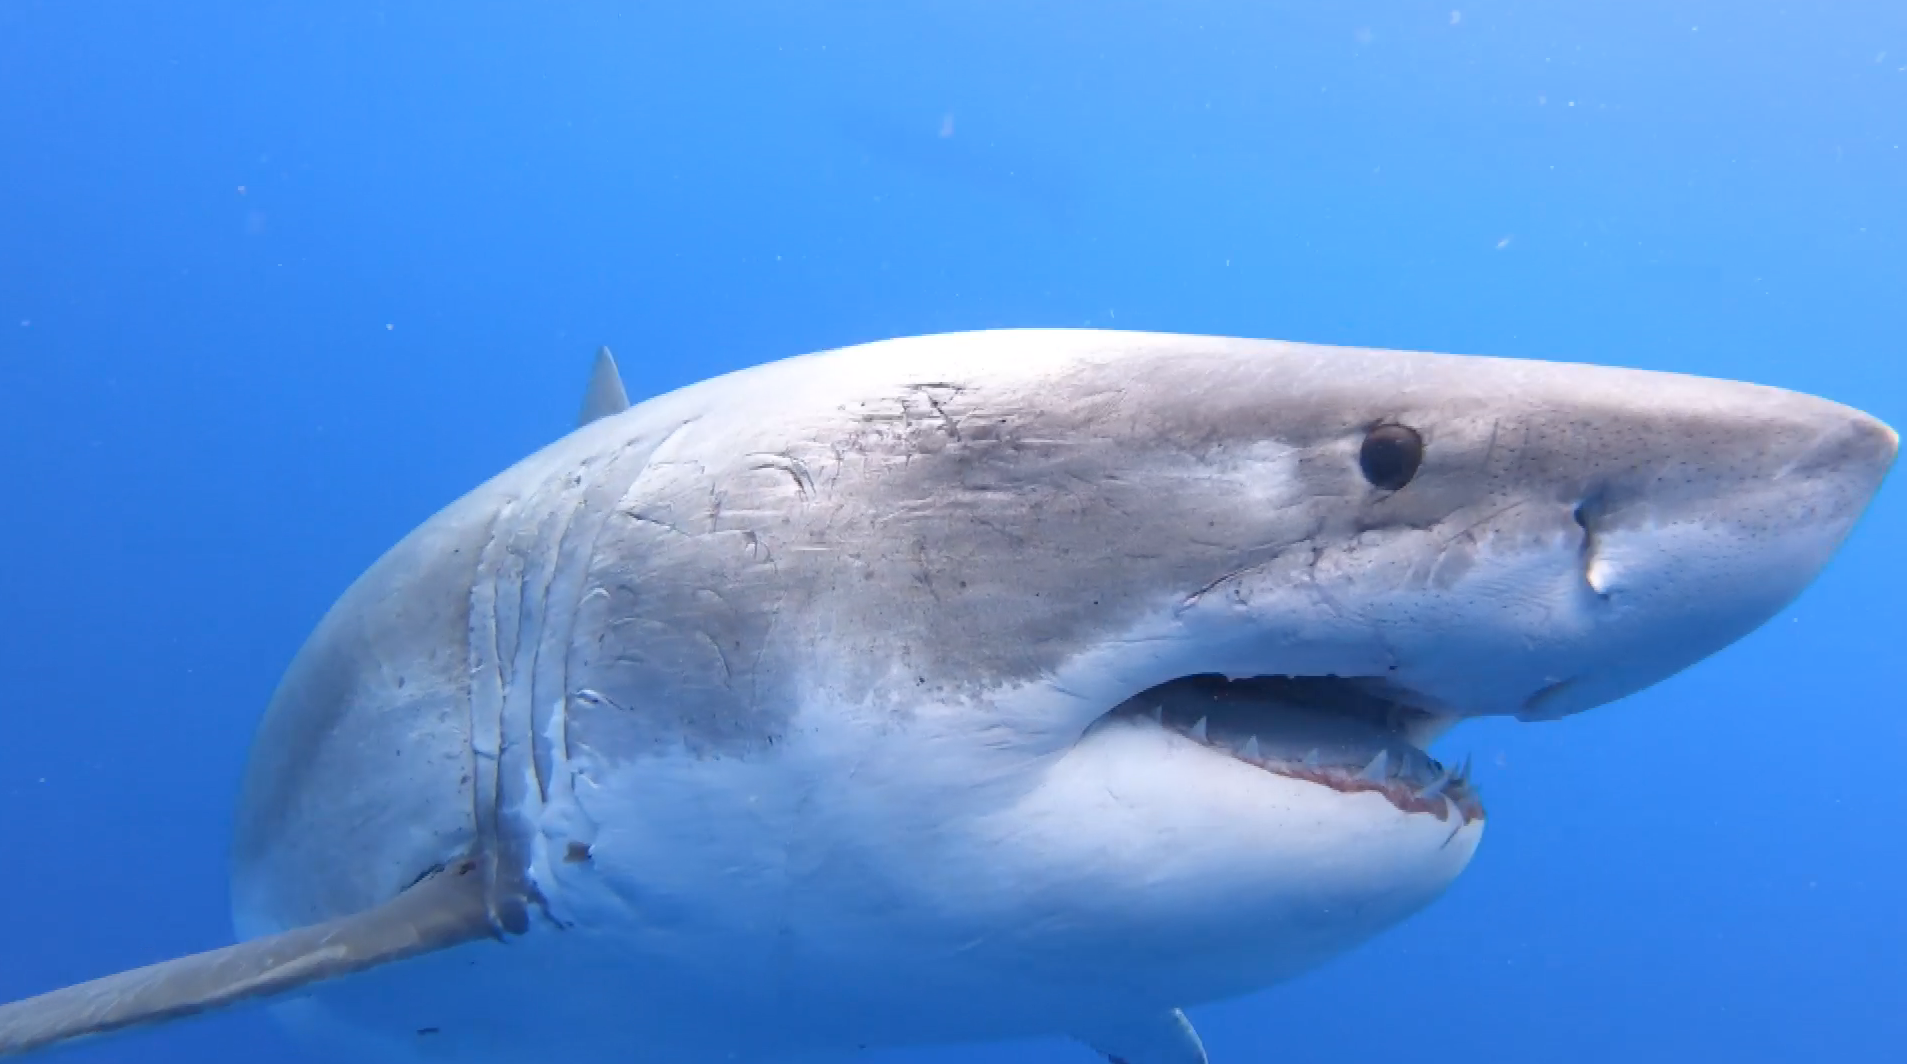 The numbers of greate white sharks in our ocean are decreasing and iis listed as vulnerable and migratory under the Environment Protection and Biodiversity Conservation Act 1999 in Australia.